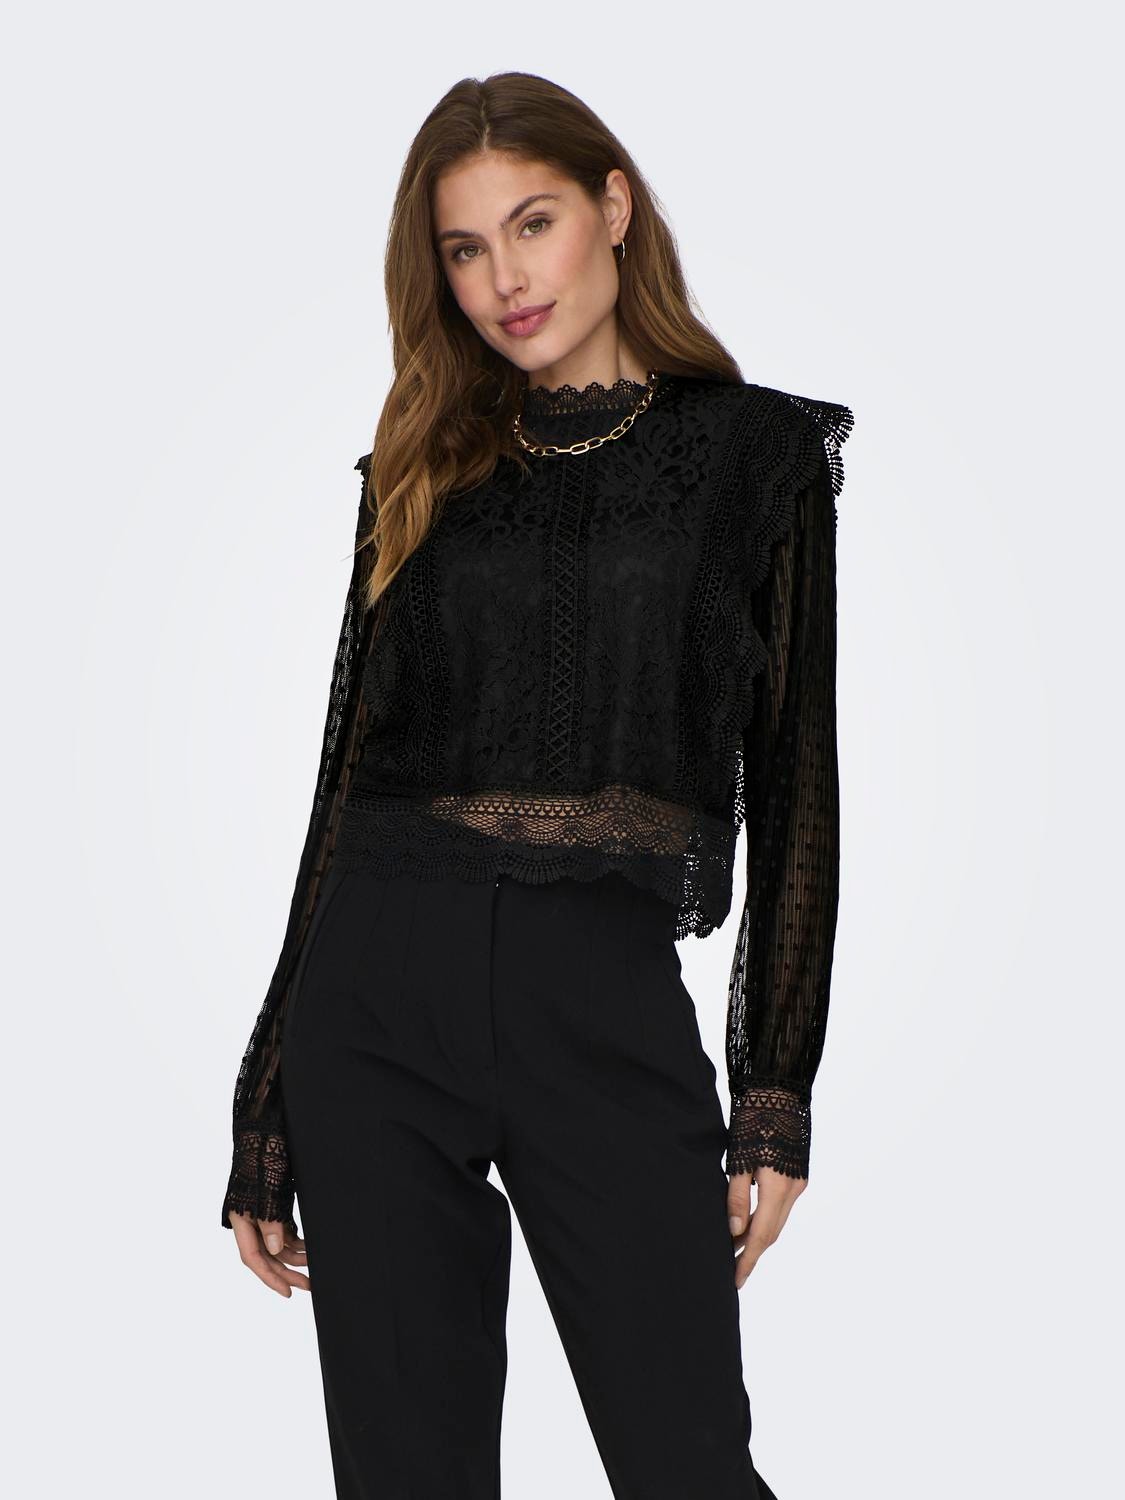 ONLY O-neck lace top -Black - 15305687